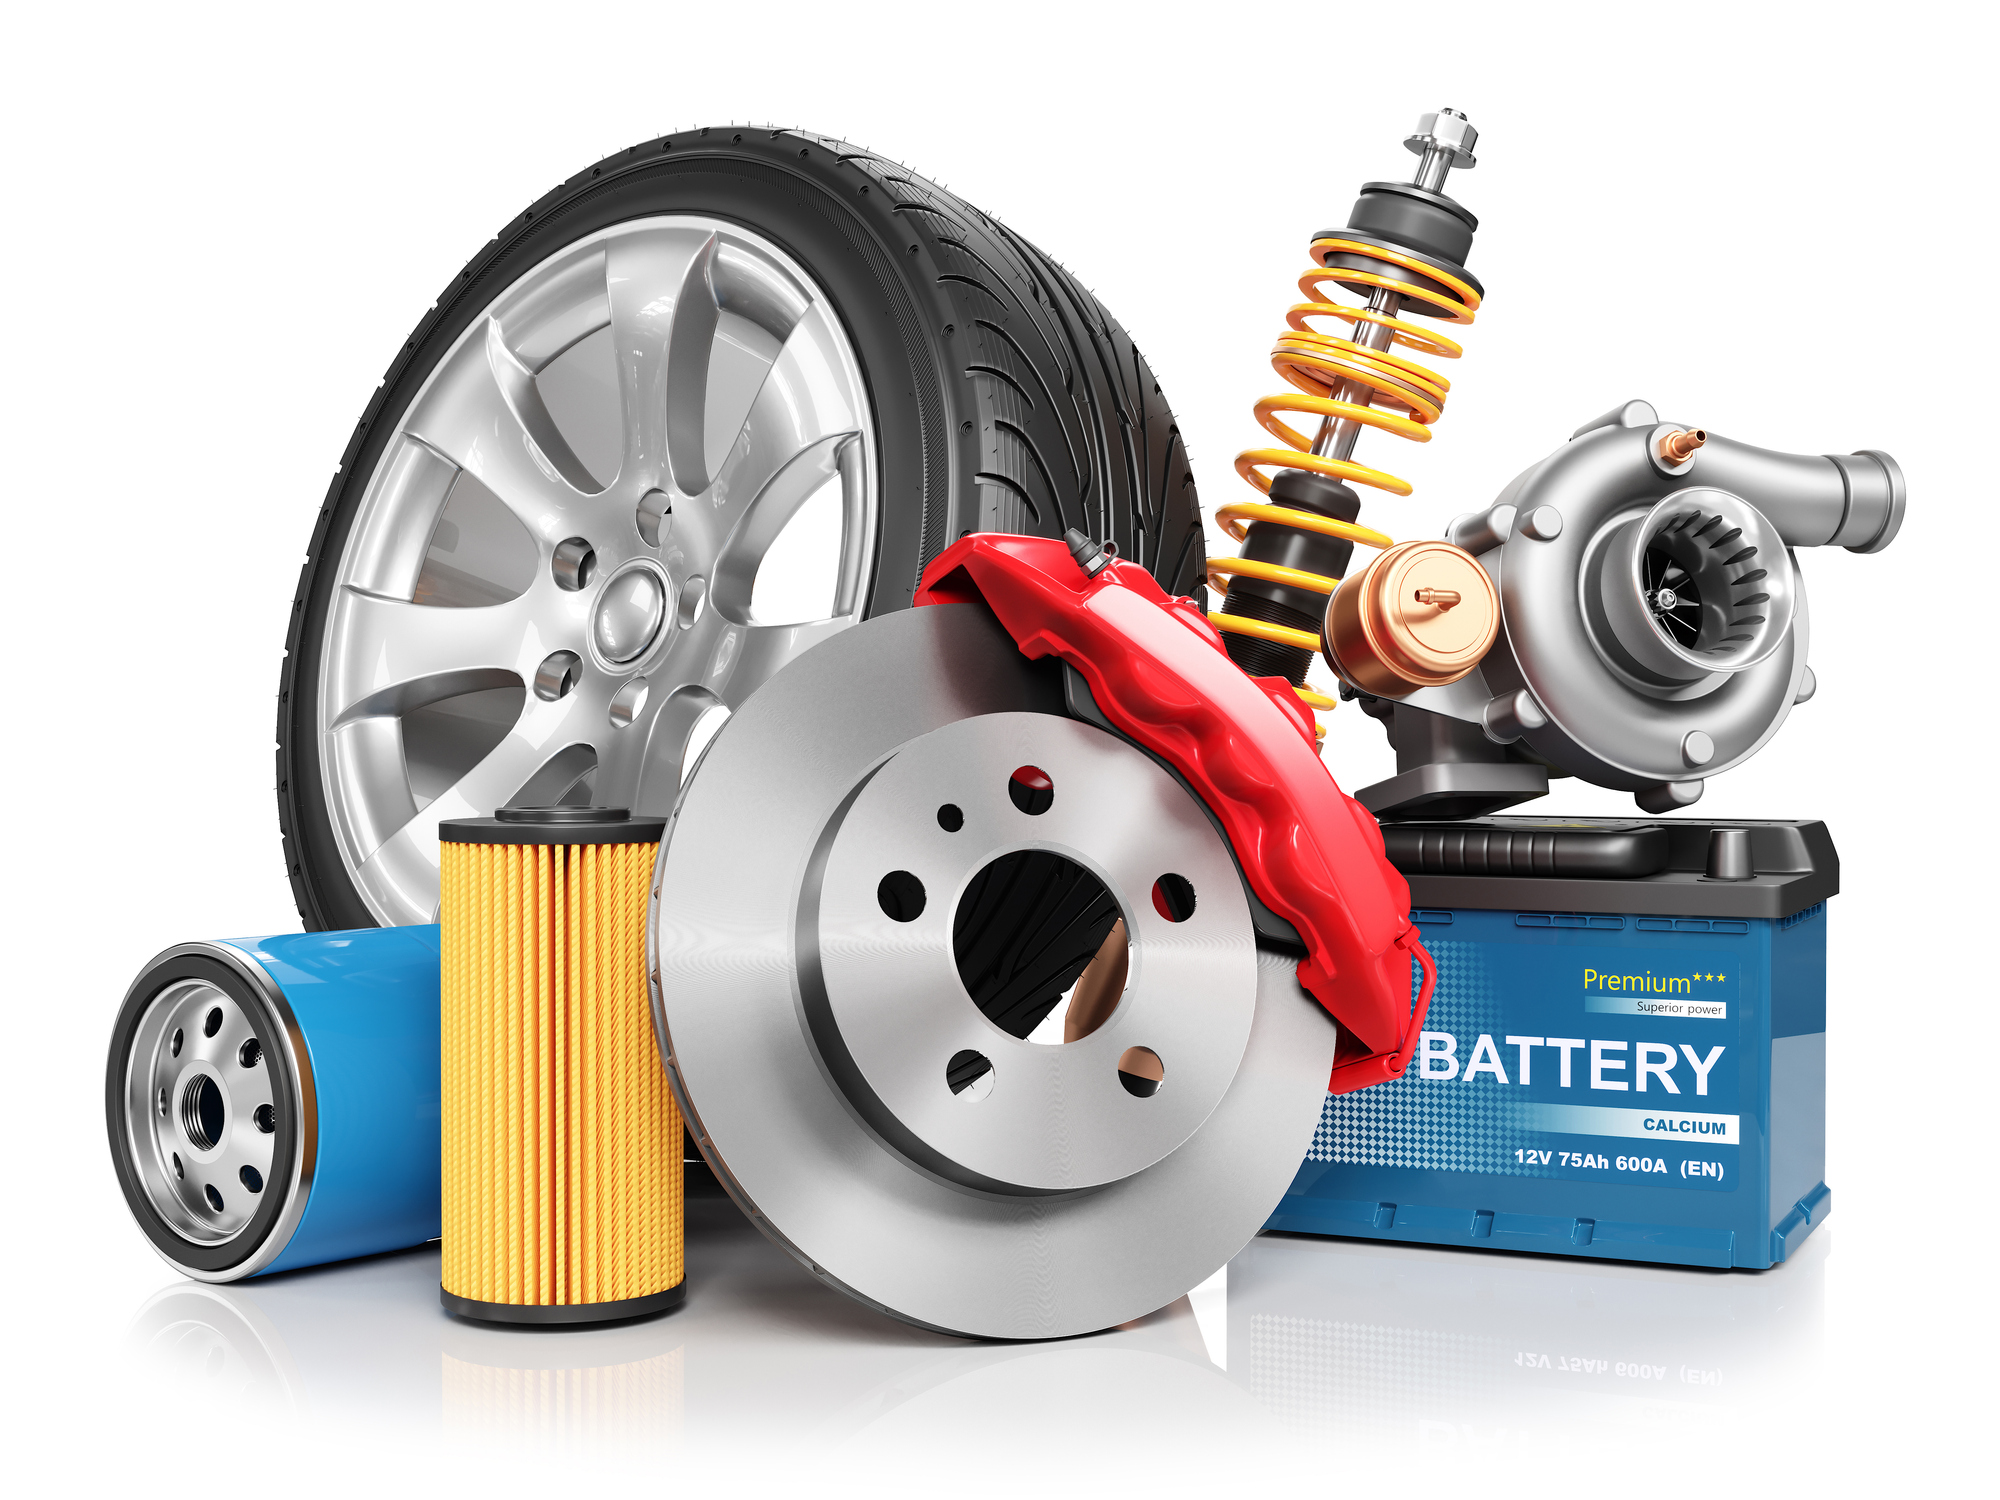 Risks and Safety Plans for Auto Part Stores